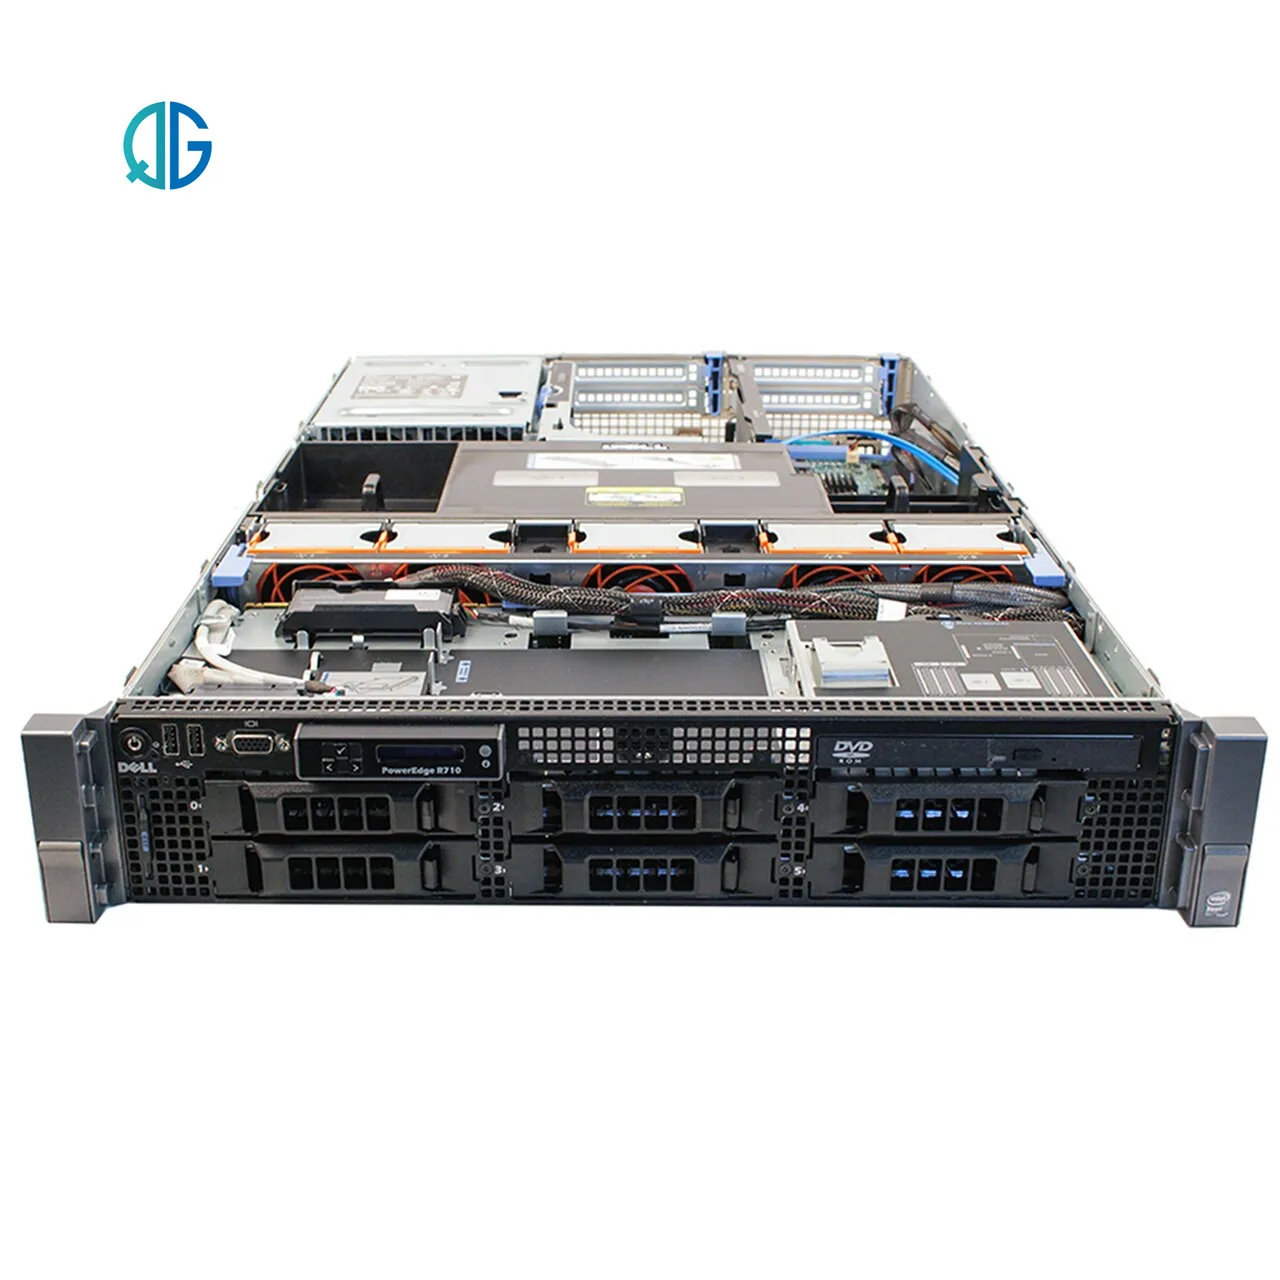 Dell Poweredge R710 Used Server With X5660 Cpu In Stock - Buy Used Server,Dell  Server,Workstat Xeon Product on 